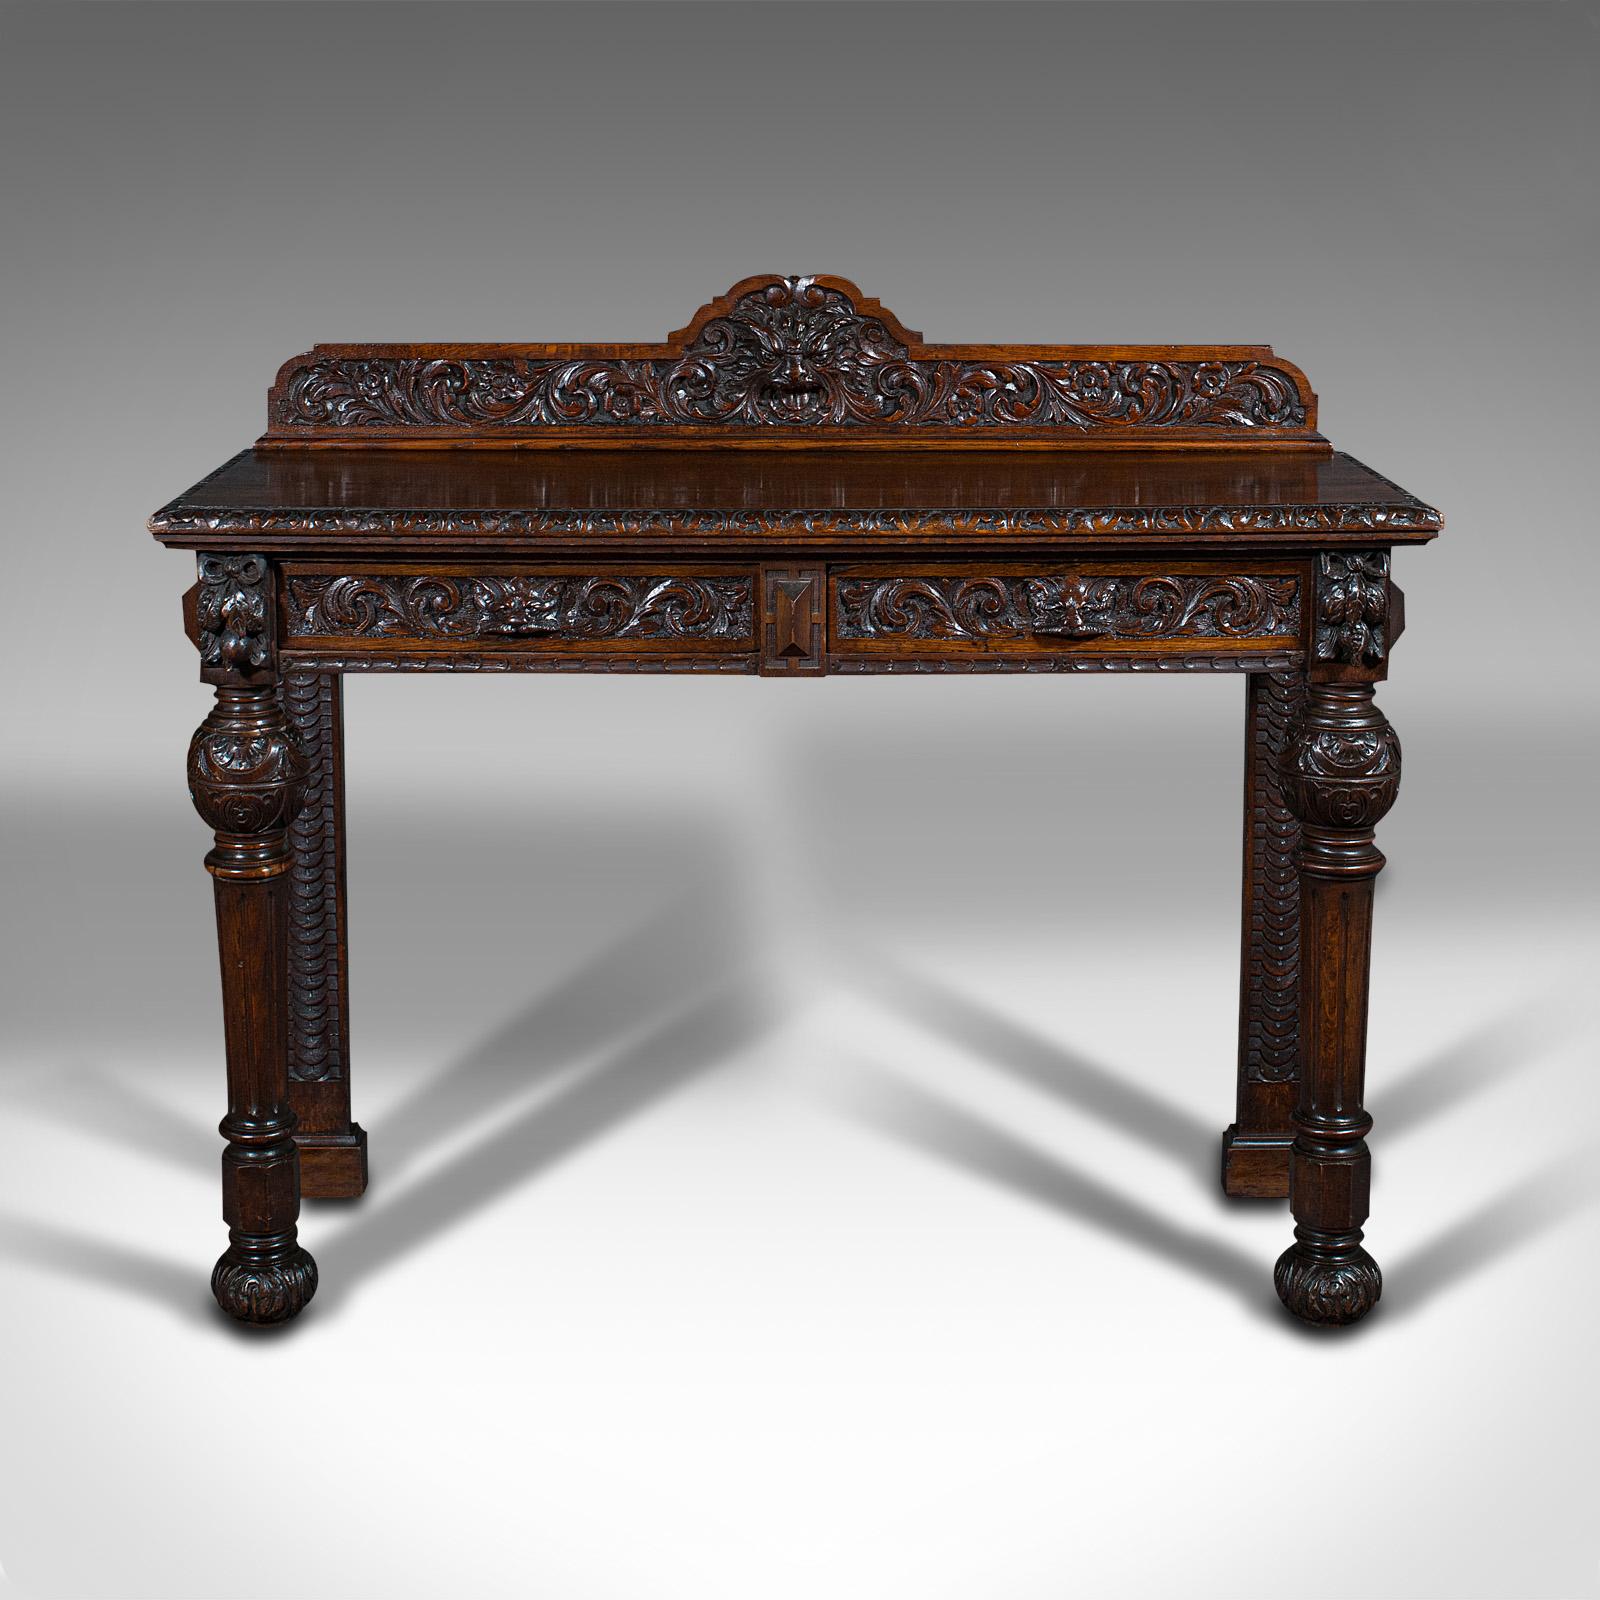 This is an antique side table. A Scottish, oak console table with heavily carved Gothic revival taste, dating to the Victorian period, circa 1880.

Superb example of Scottish Gothic revival taste with enthusiastic carved decoration
Displays a